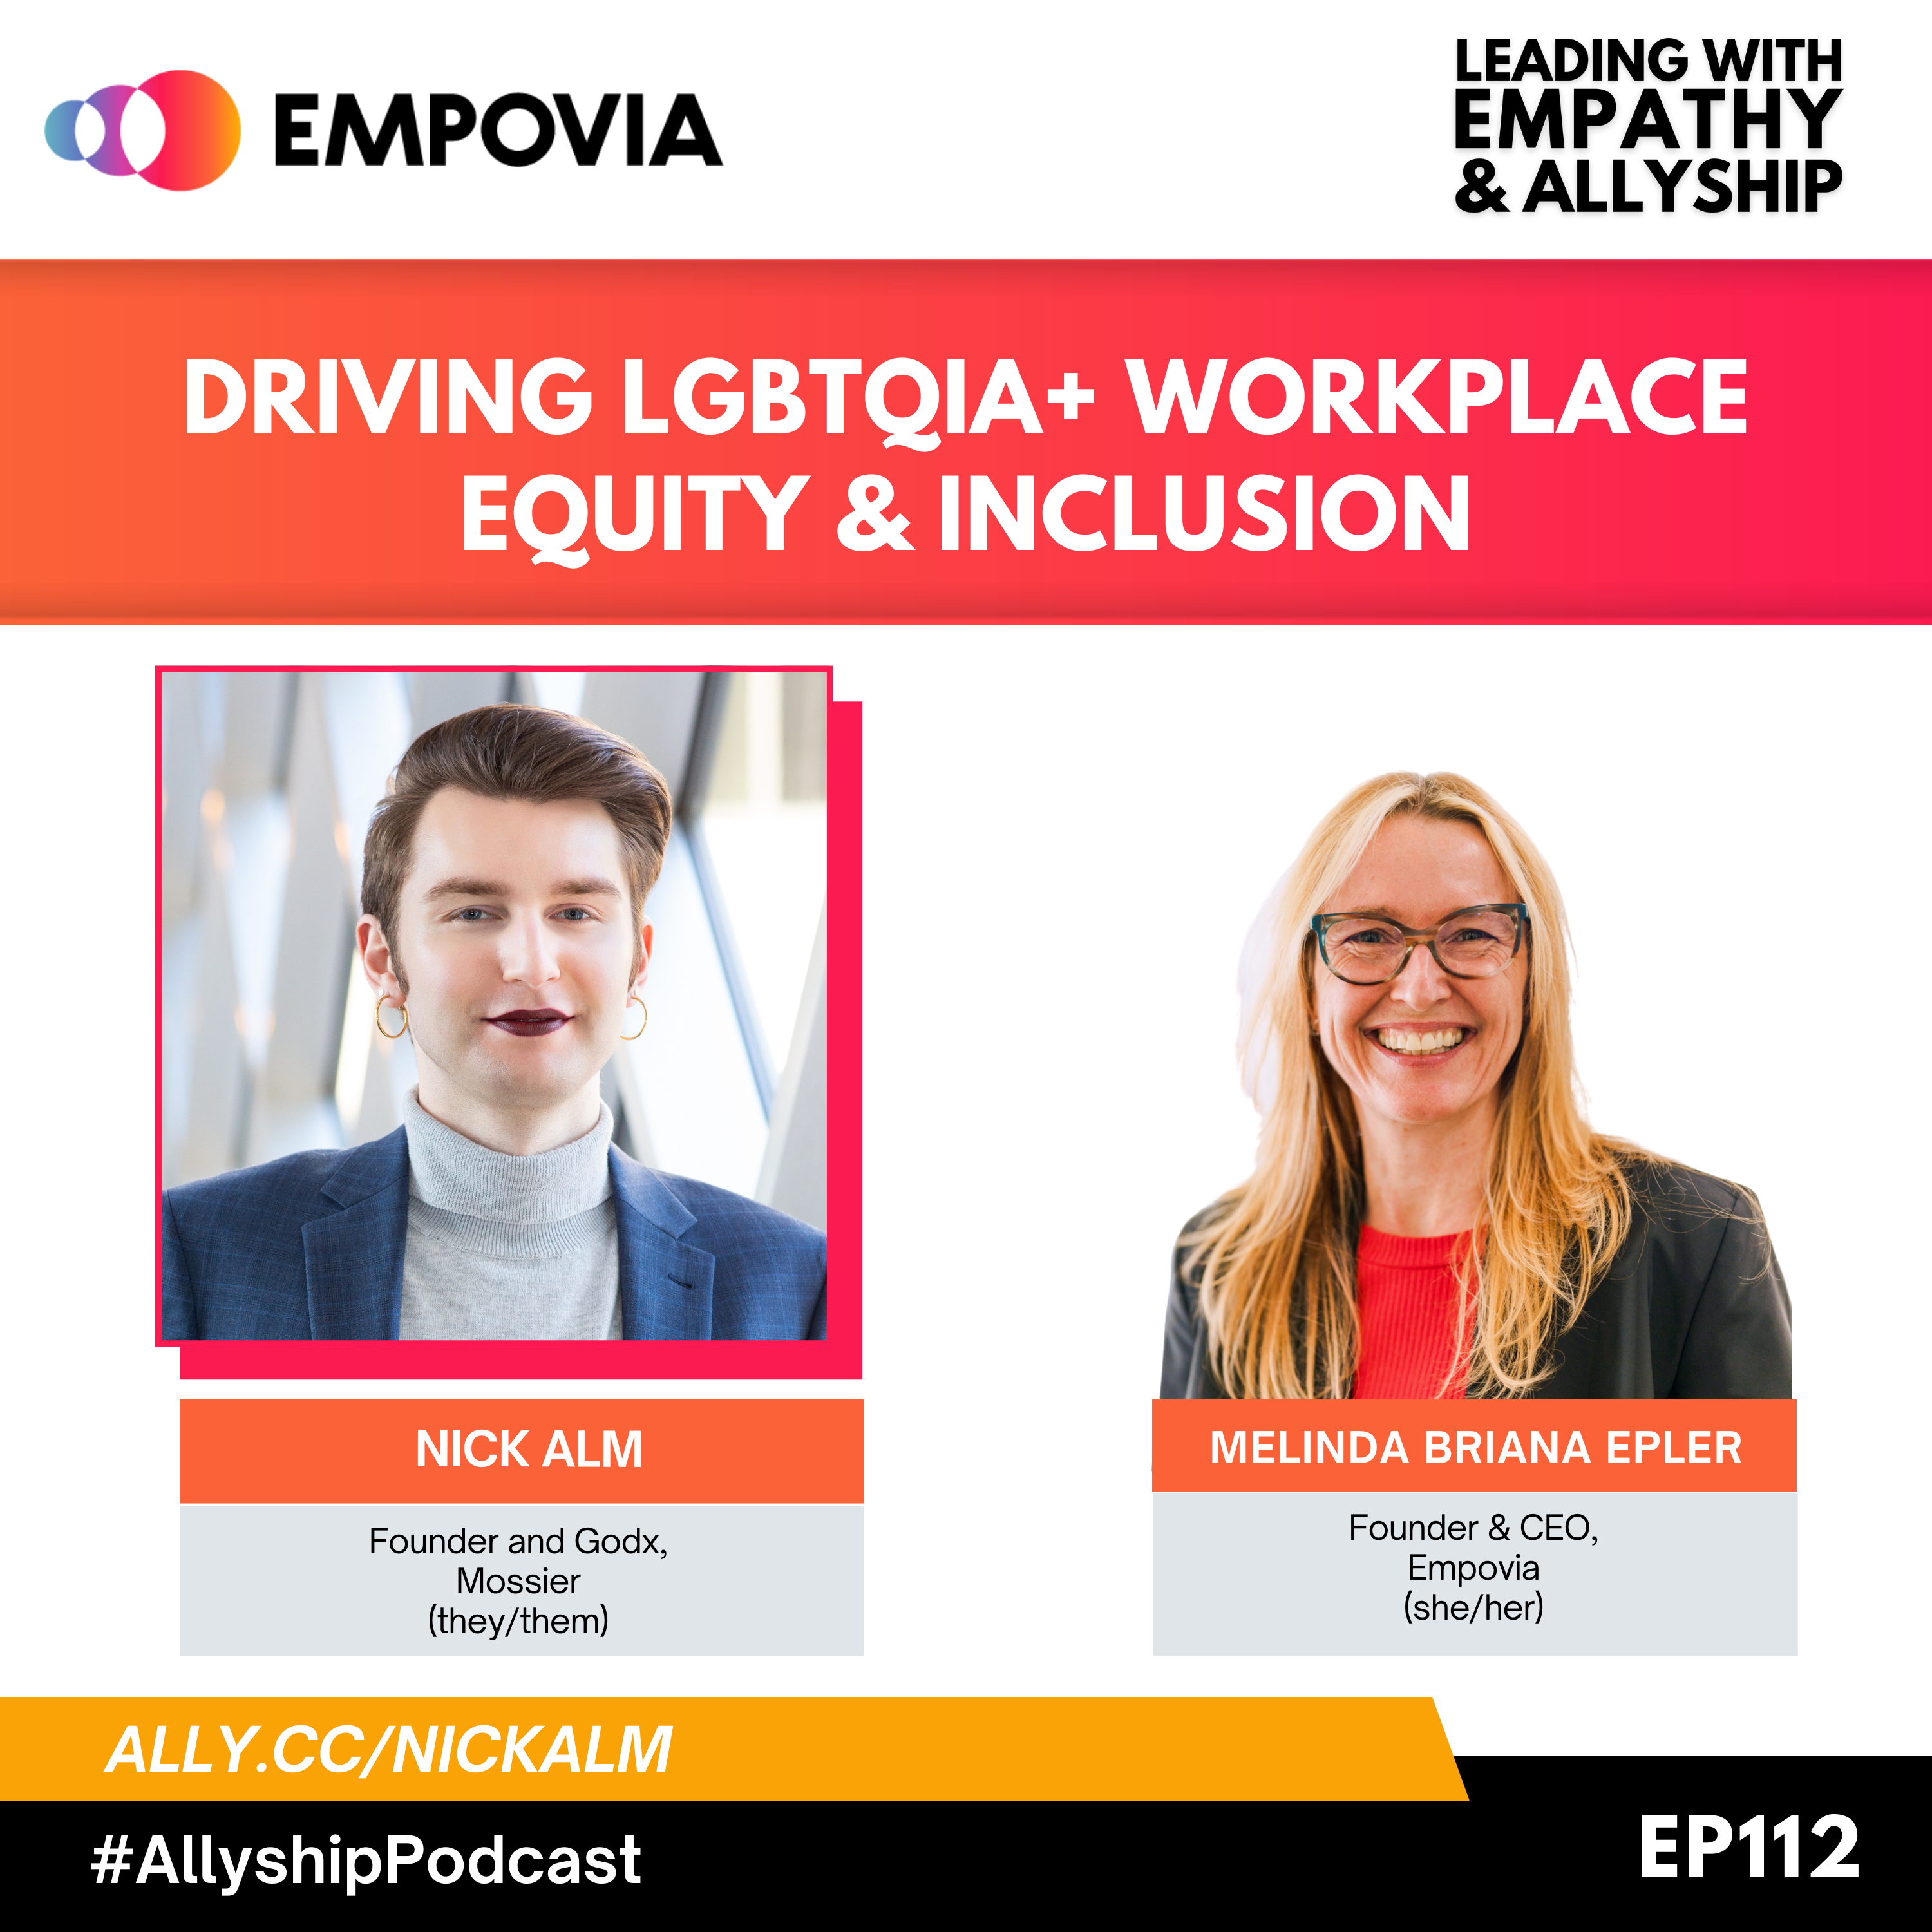 Leading With Empathy & Allyship promo and photos of Nick Alm, a White nonbinary person with short light brown hair, golden hoop earrings, eyeliner, sparkles, purplish-red lips, grey turtleneck, and plaid blue suit; and host Melinda Briana Epler, a White woman with blonde and red hair, glasses, red shirt, and black jacket.